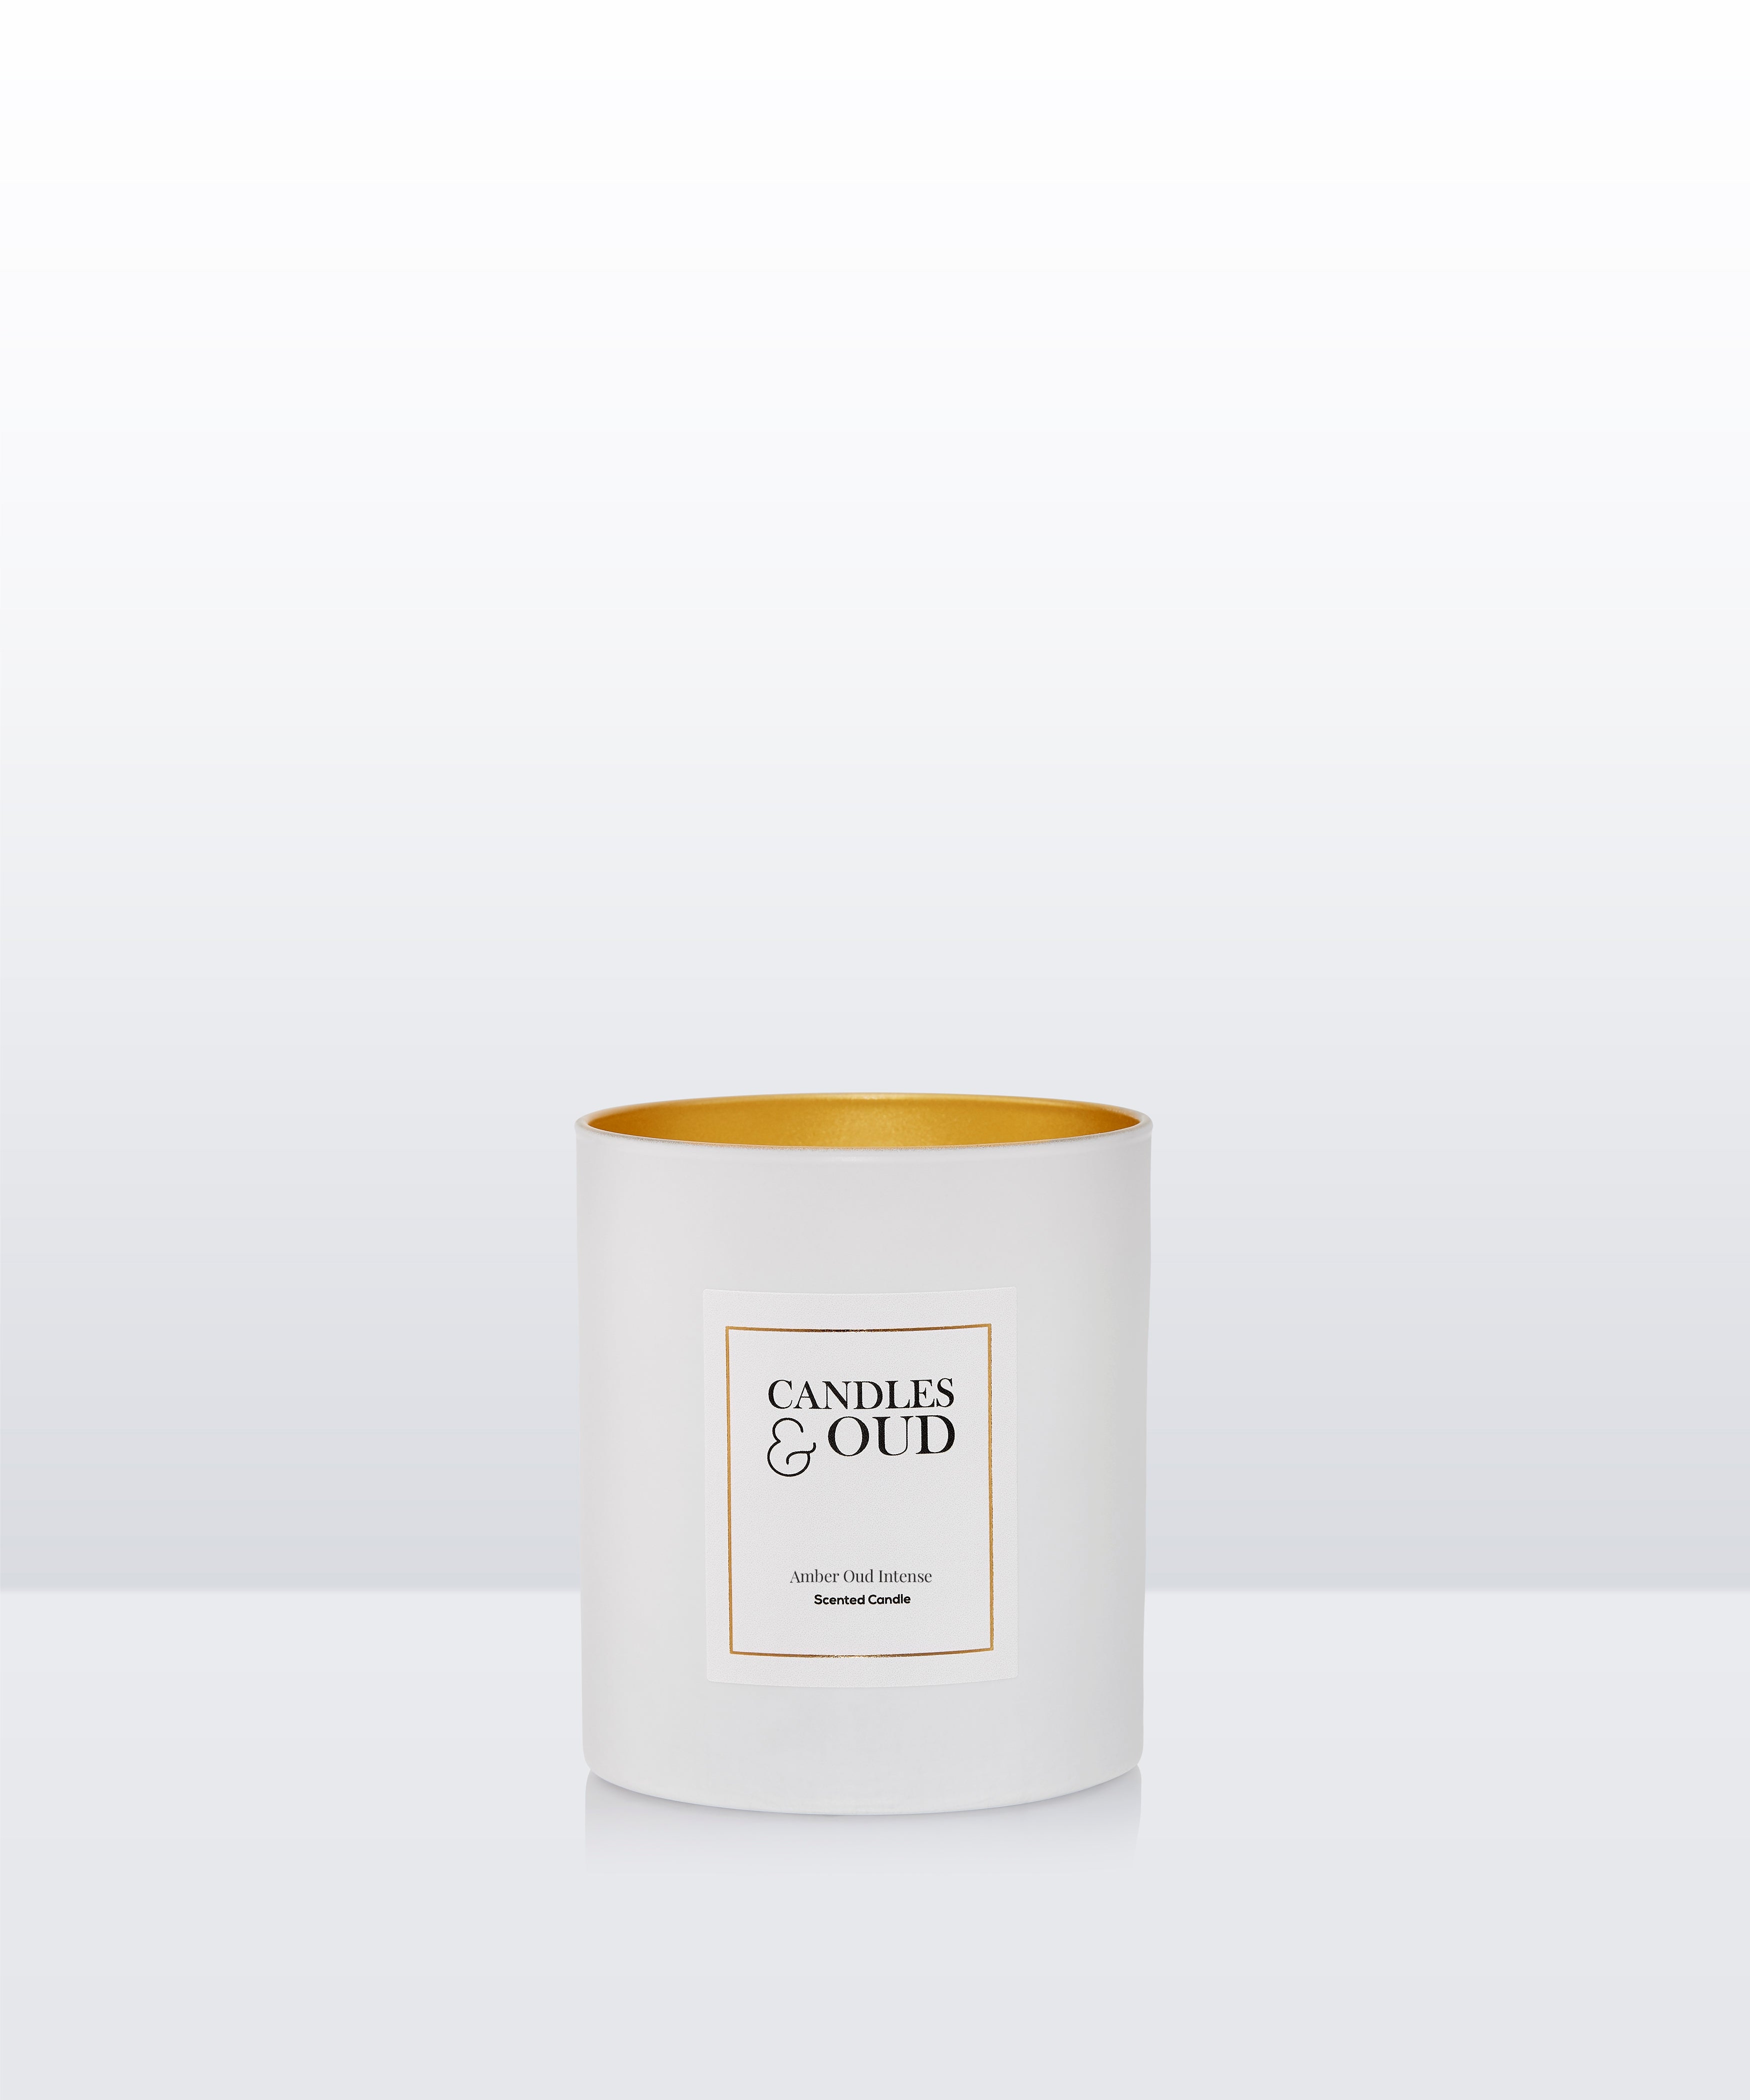 Amber Oud Intense Candle